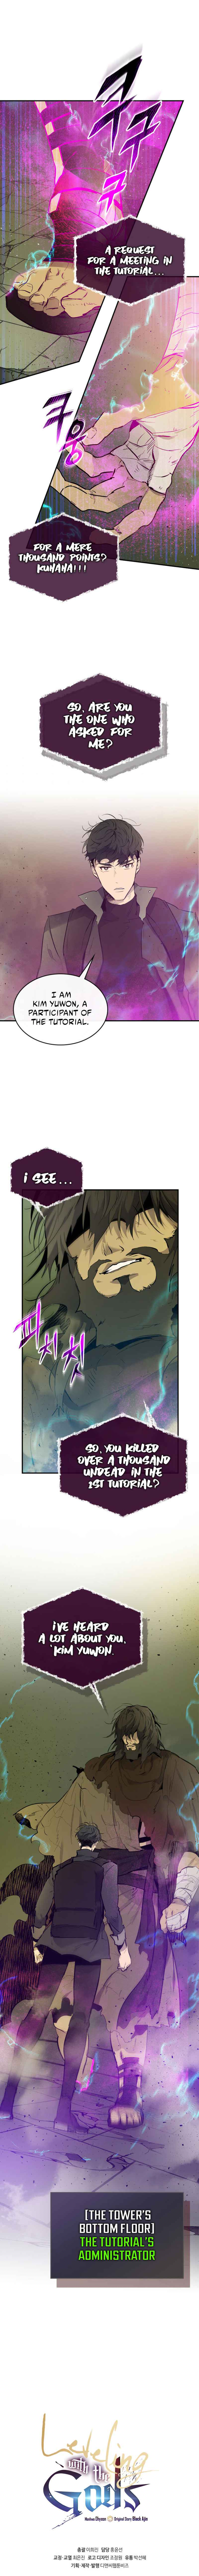 Leveling With The Gods Chapter 6, Leveling With The Gods 6, Read Leveling With The Gods Chapter 6, Leveling With The Gods Chapter 6 Manga, Leveling With The Gods Chapter 6 english, Leveling With The Gods Chapter 6 raw manga, Leveling With The Gods Chapter 6 online, Leveling With The Gods Chapter 6 high quality, Leveling With The Gods 6 chapter, Leveling With The Gods Chapter 6 manga scan